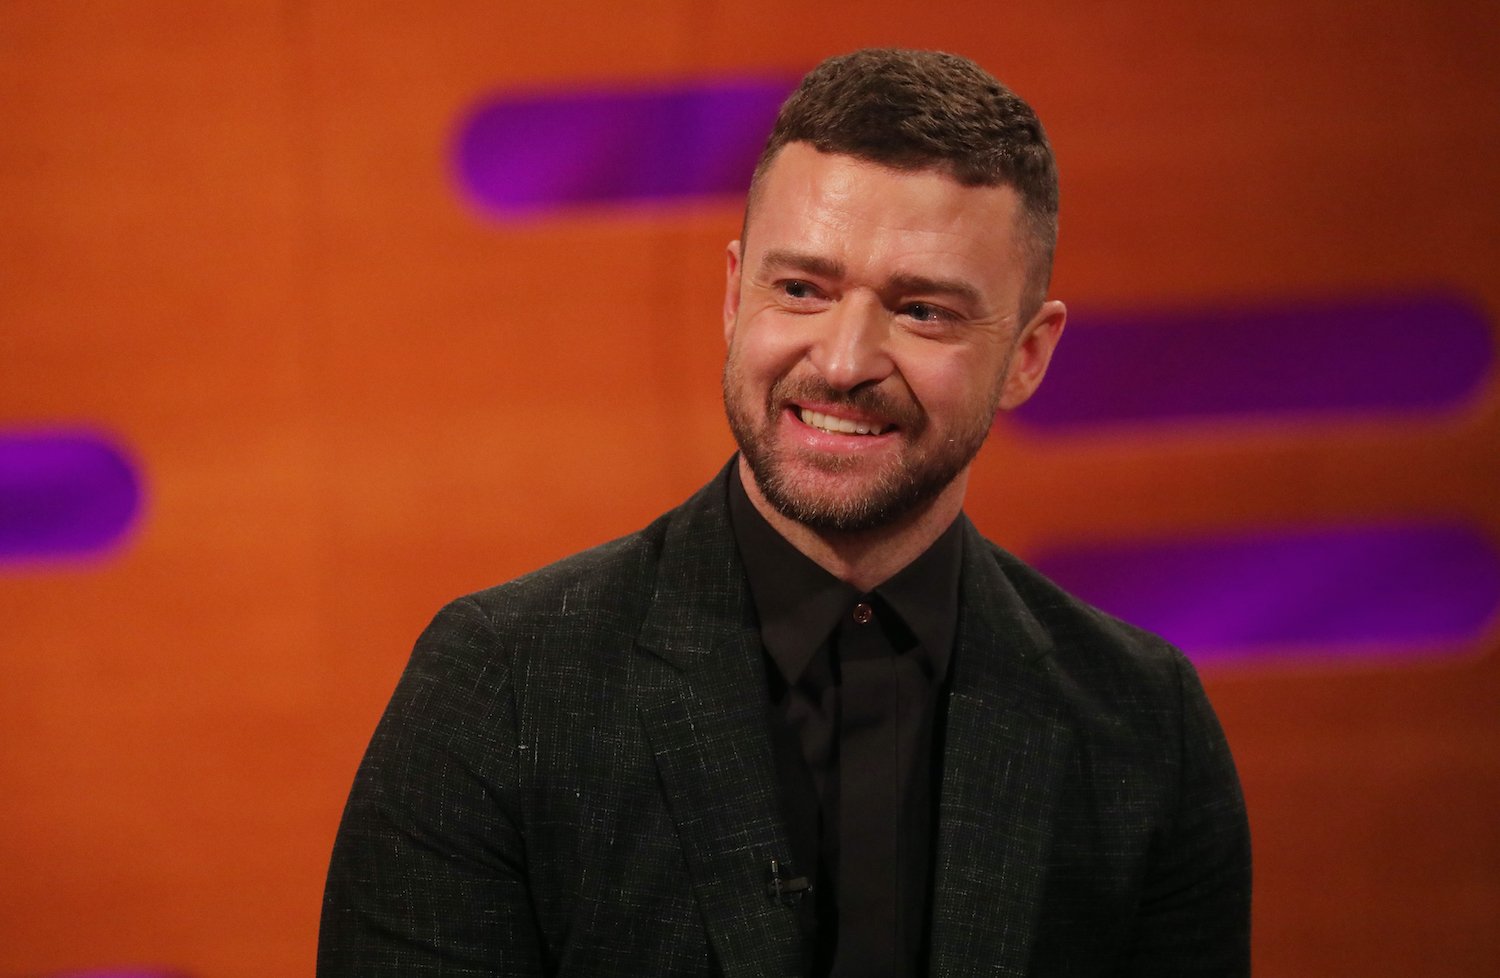 Justin Timberlake during the filming for the Graham Norton Show